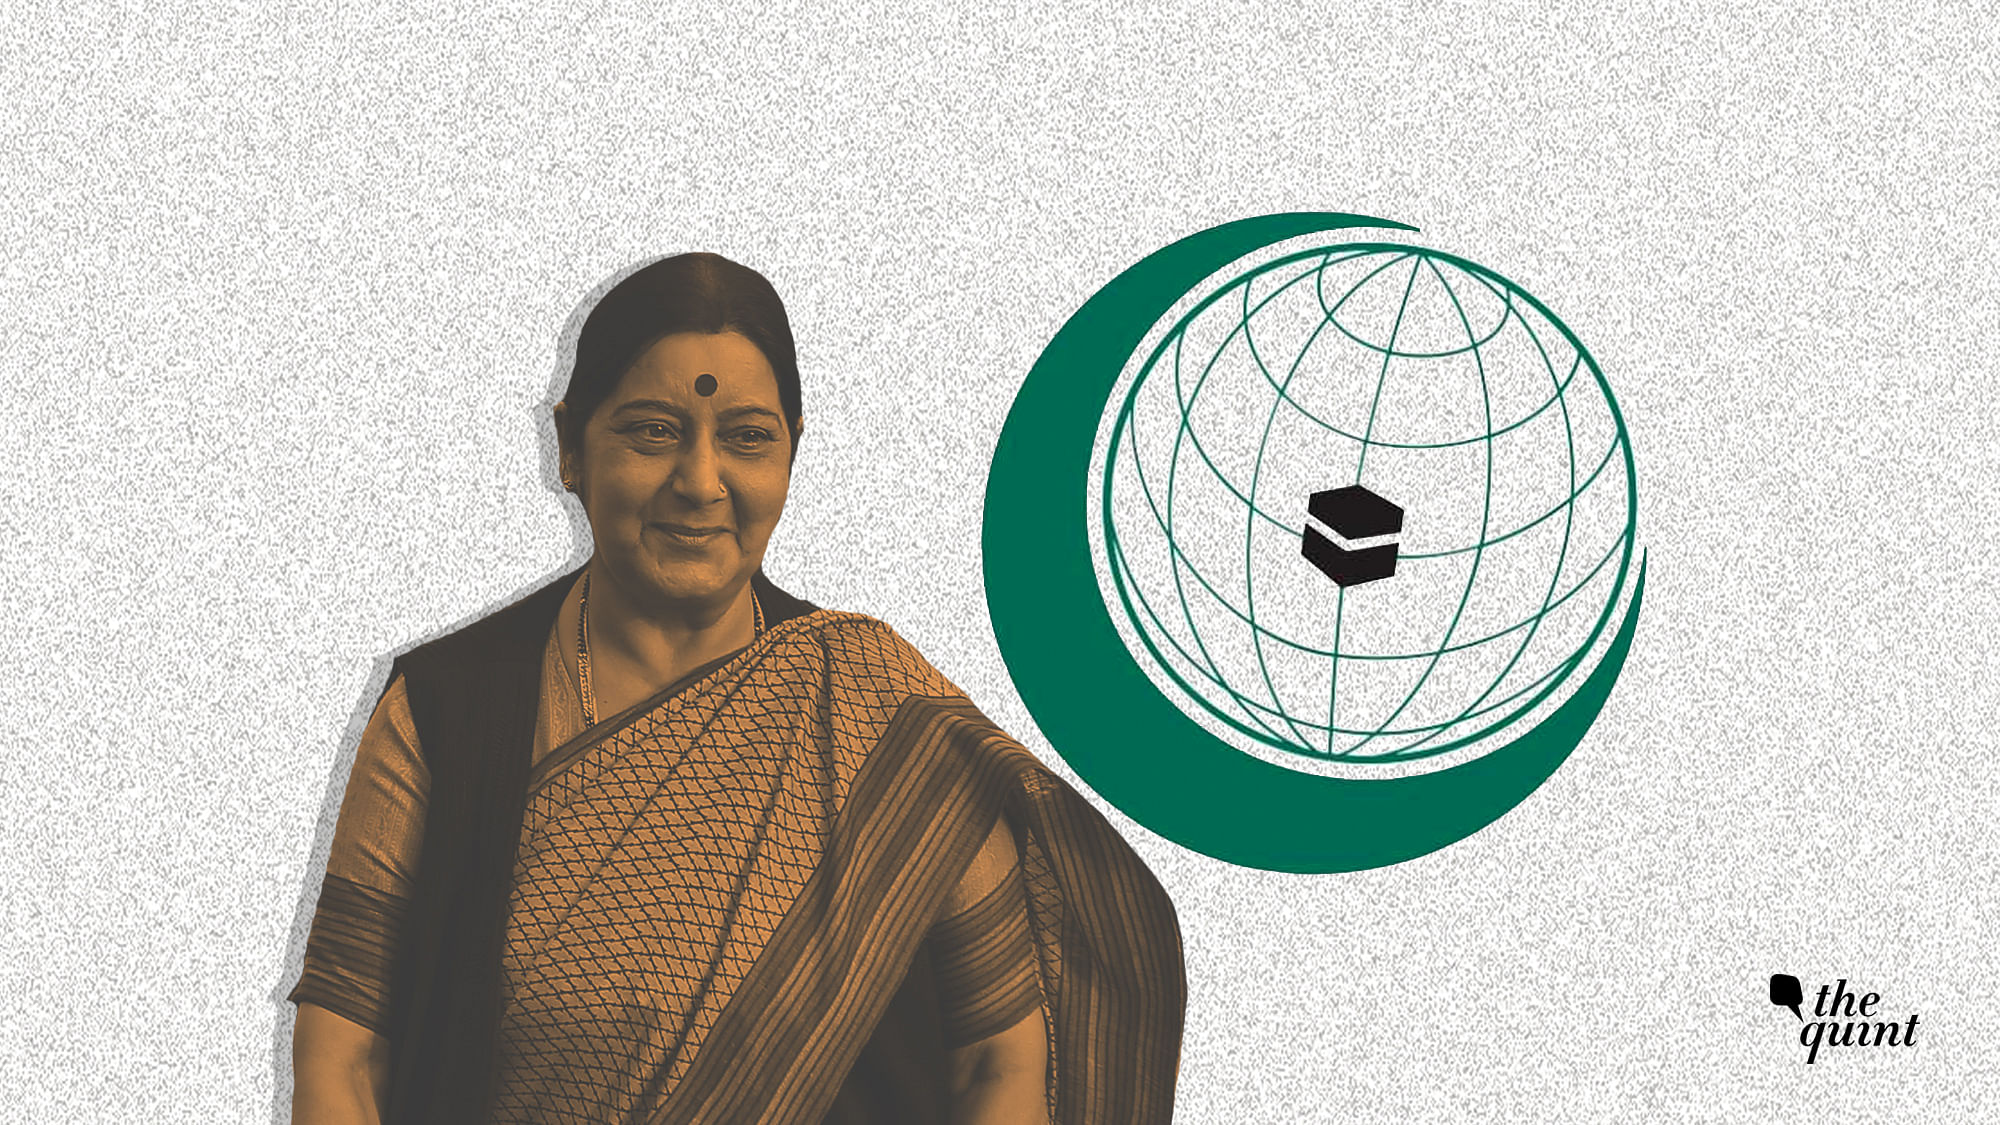 India being invited to OIC is not quite the unalloyed triumph as is being made out in official circles, but it is an important development with portents for the future.